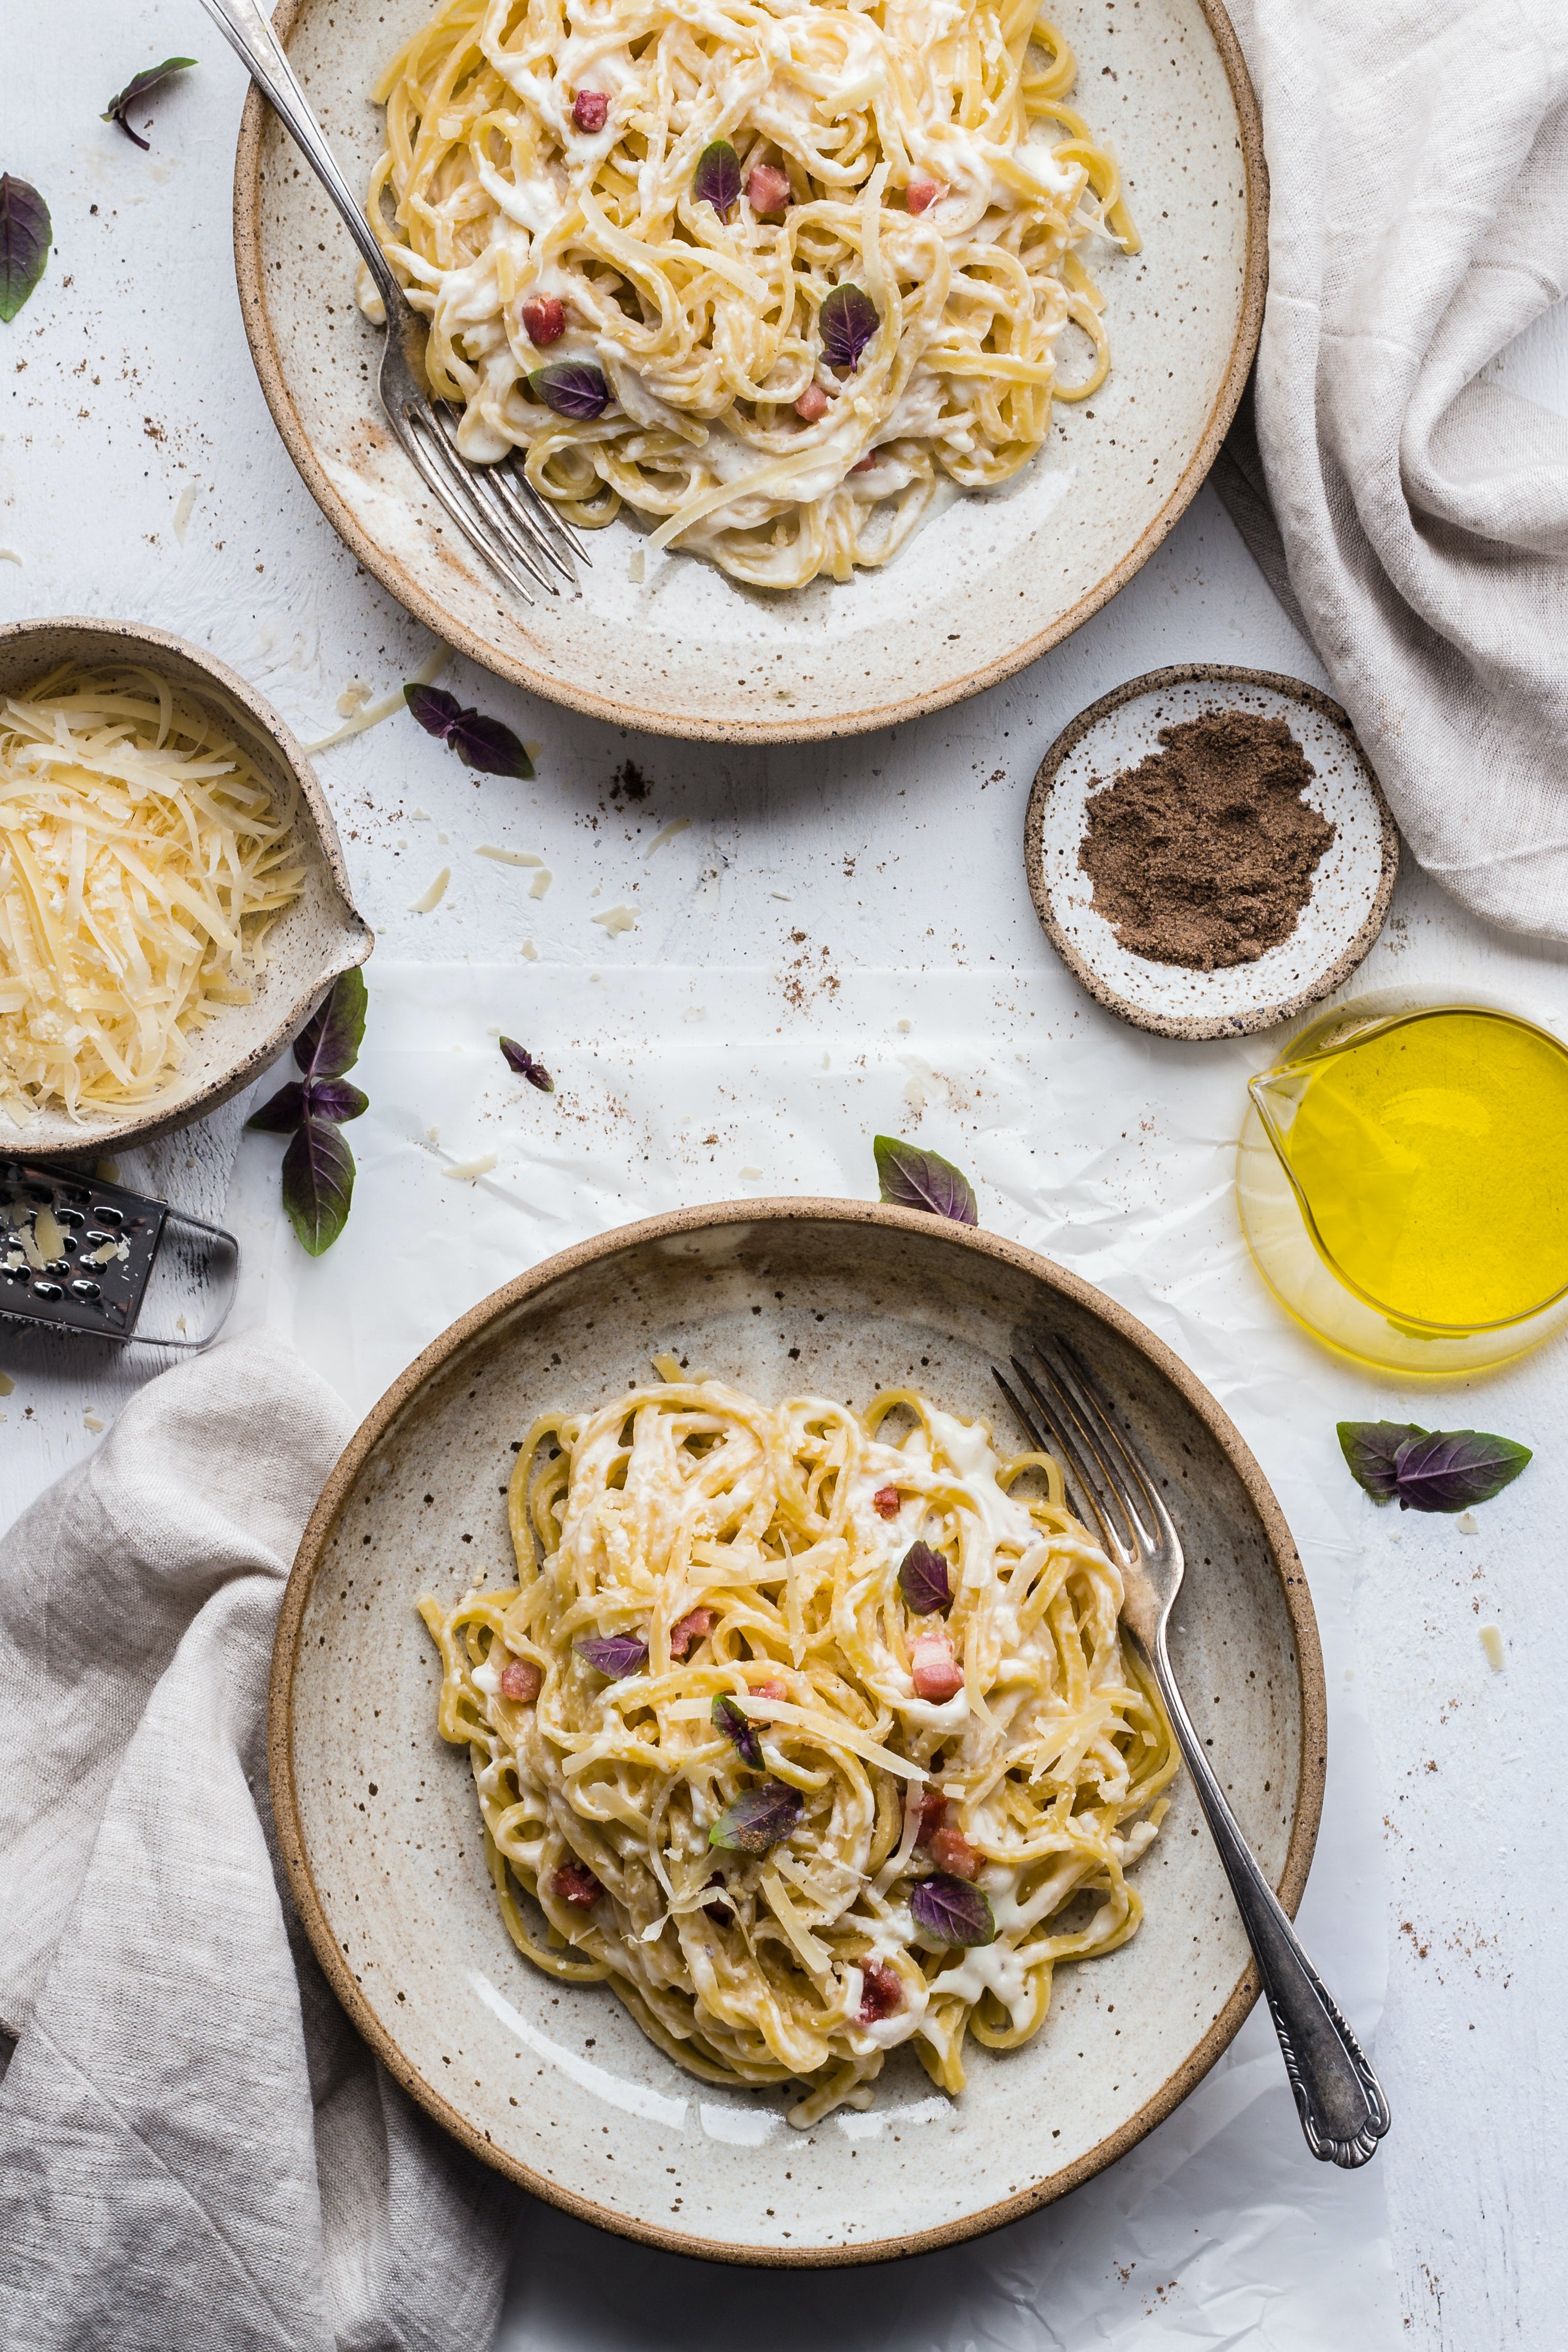 Gluten-Free Chickpea Pasta with Lemon, Ricotta and Dried Figs